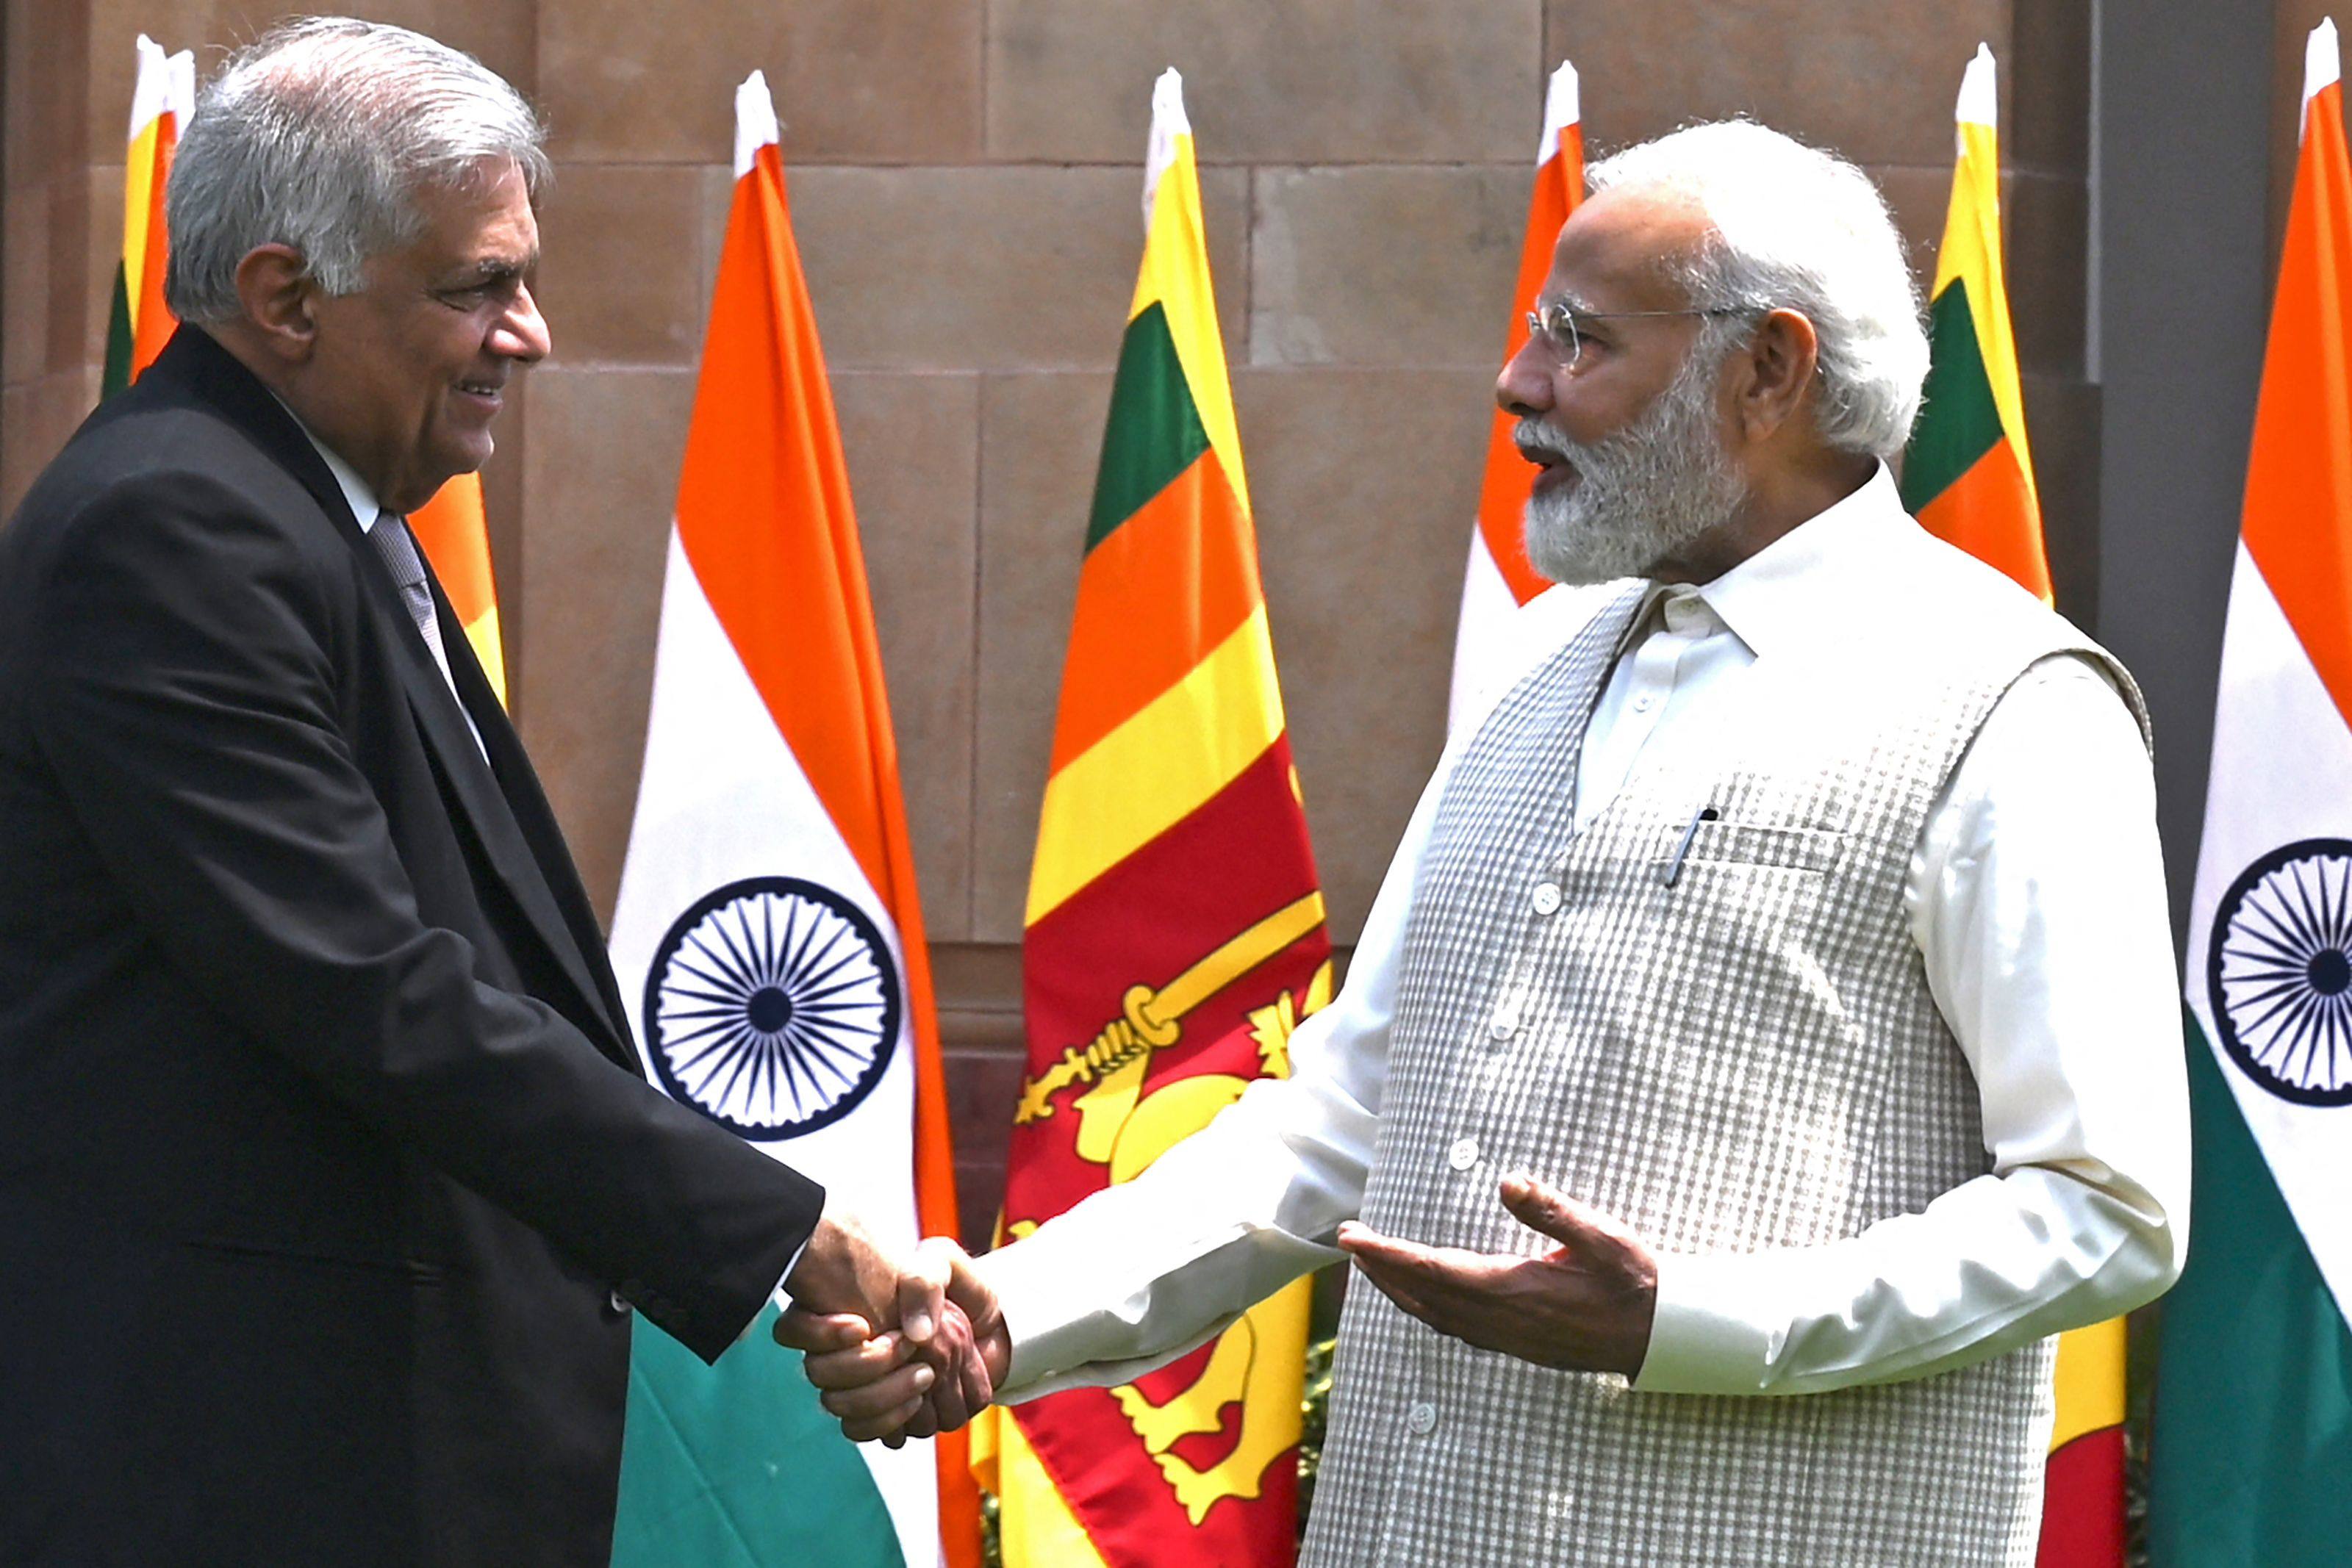 Sri Lanka’s President Ranil Wickremesinghe (left) shakes hands with India’s Prime Minister Narendra Modi before a meeting in New Delhi on July 21, 2023. Photo: AFP